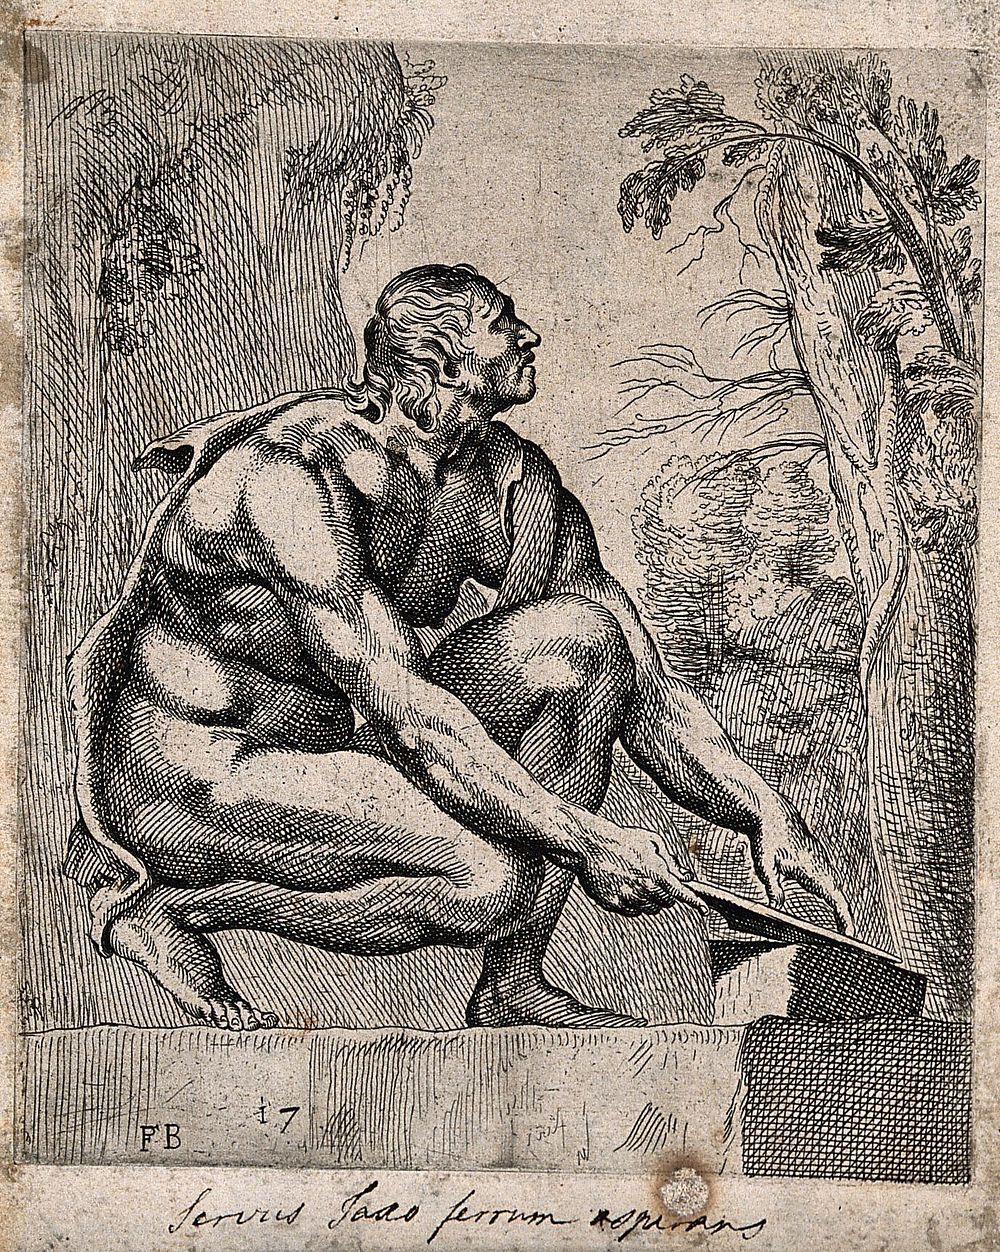 A man sharpening a blade on a whetstone. Etching by F. Perrier.